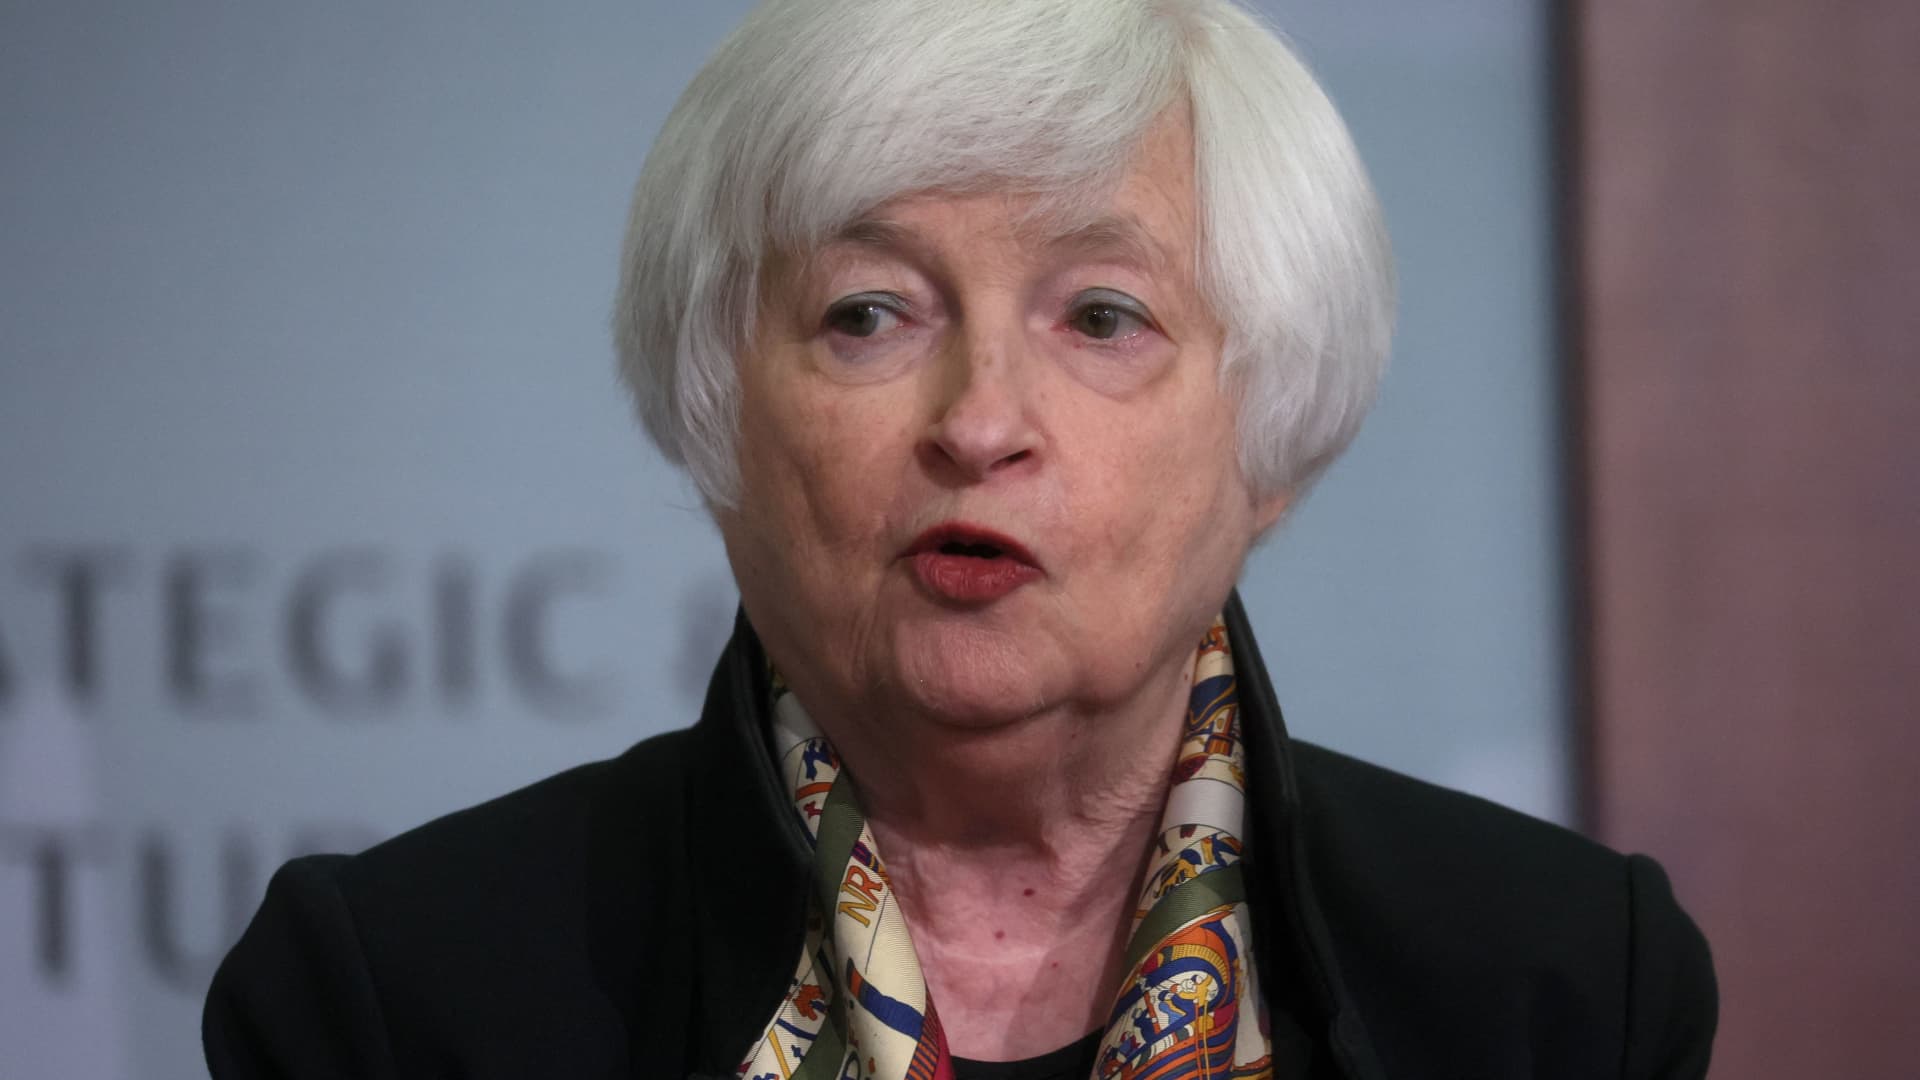 Yellen warns climate change is causing major financial losses in U.S.